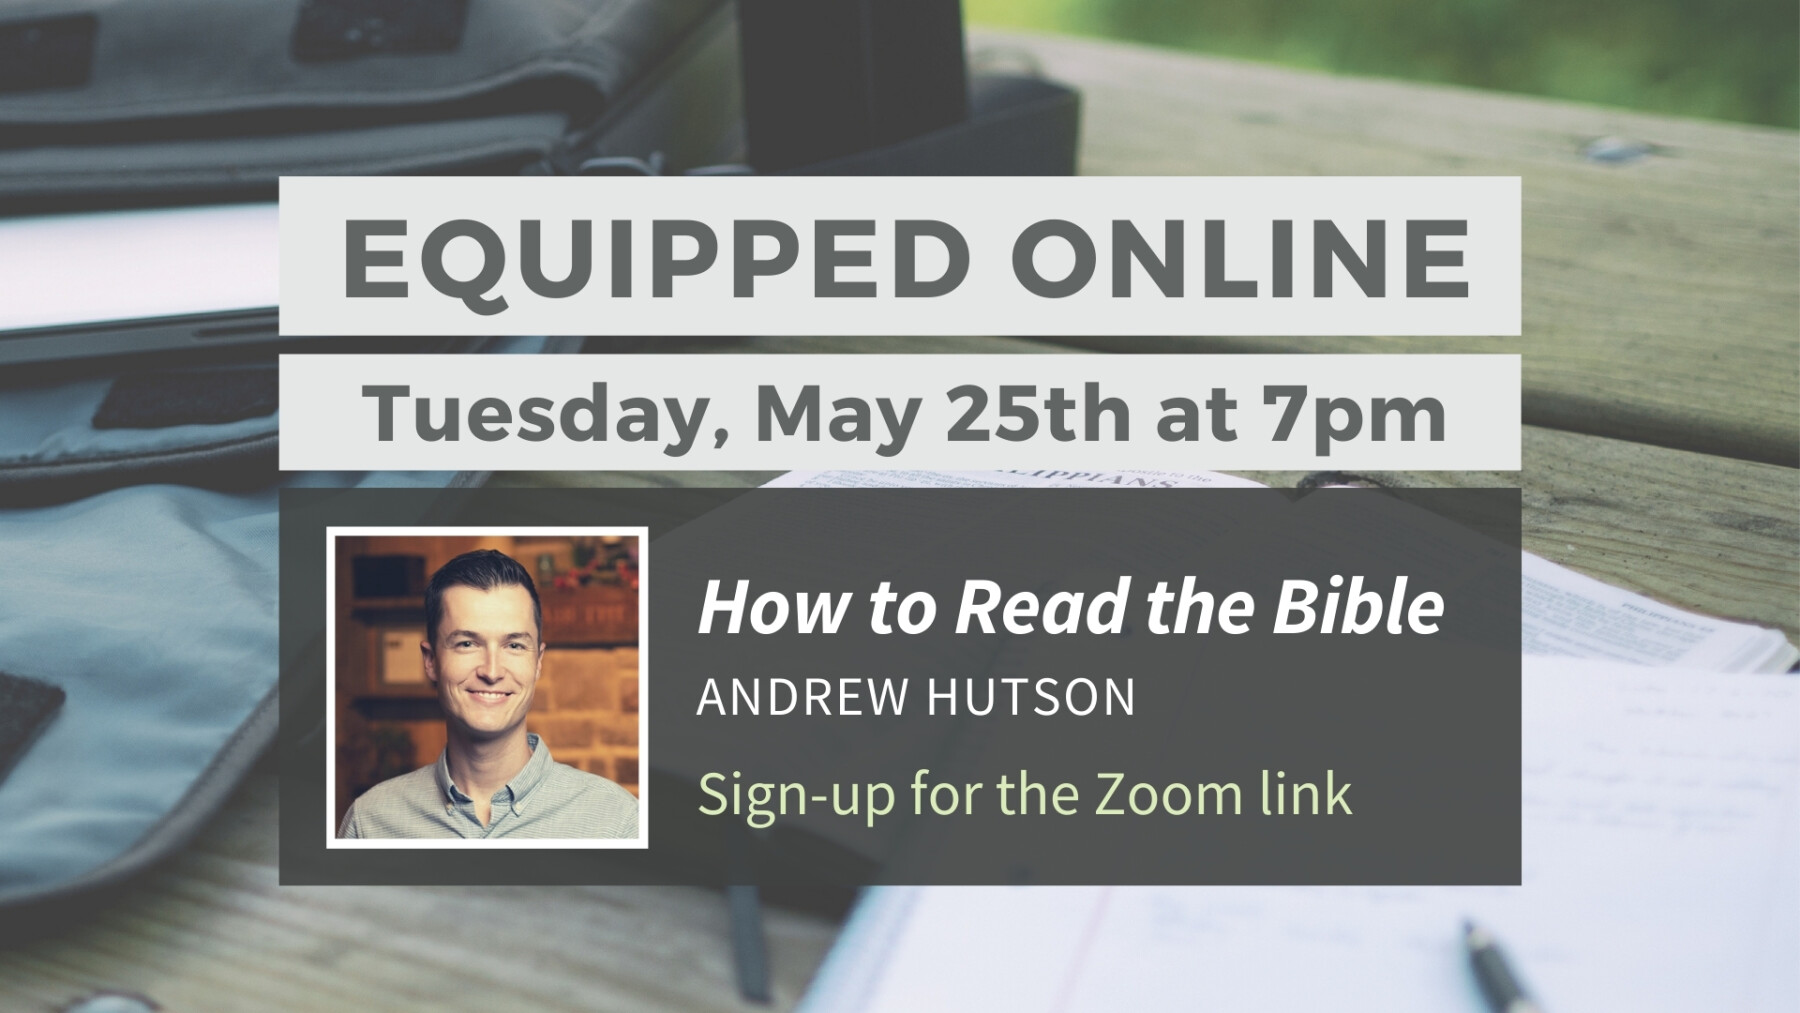 Equipped Class Online: How to Read the Bible - Tuesday, May 25th at 7pm